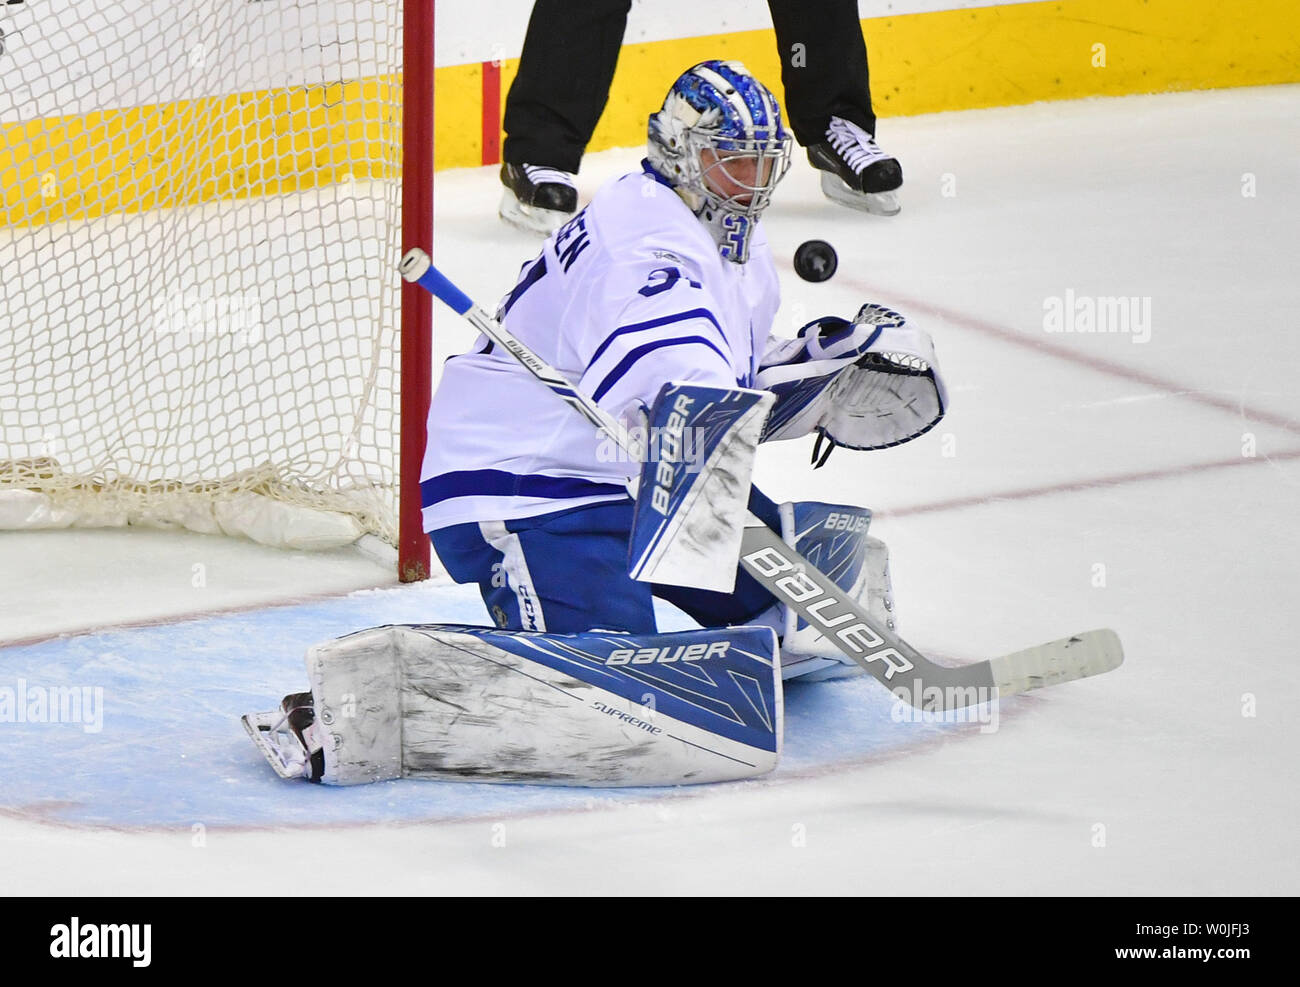 Toronto Maple Leafs acquire goalie Frederik Andersen in trade with